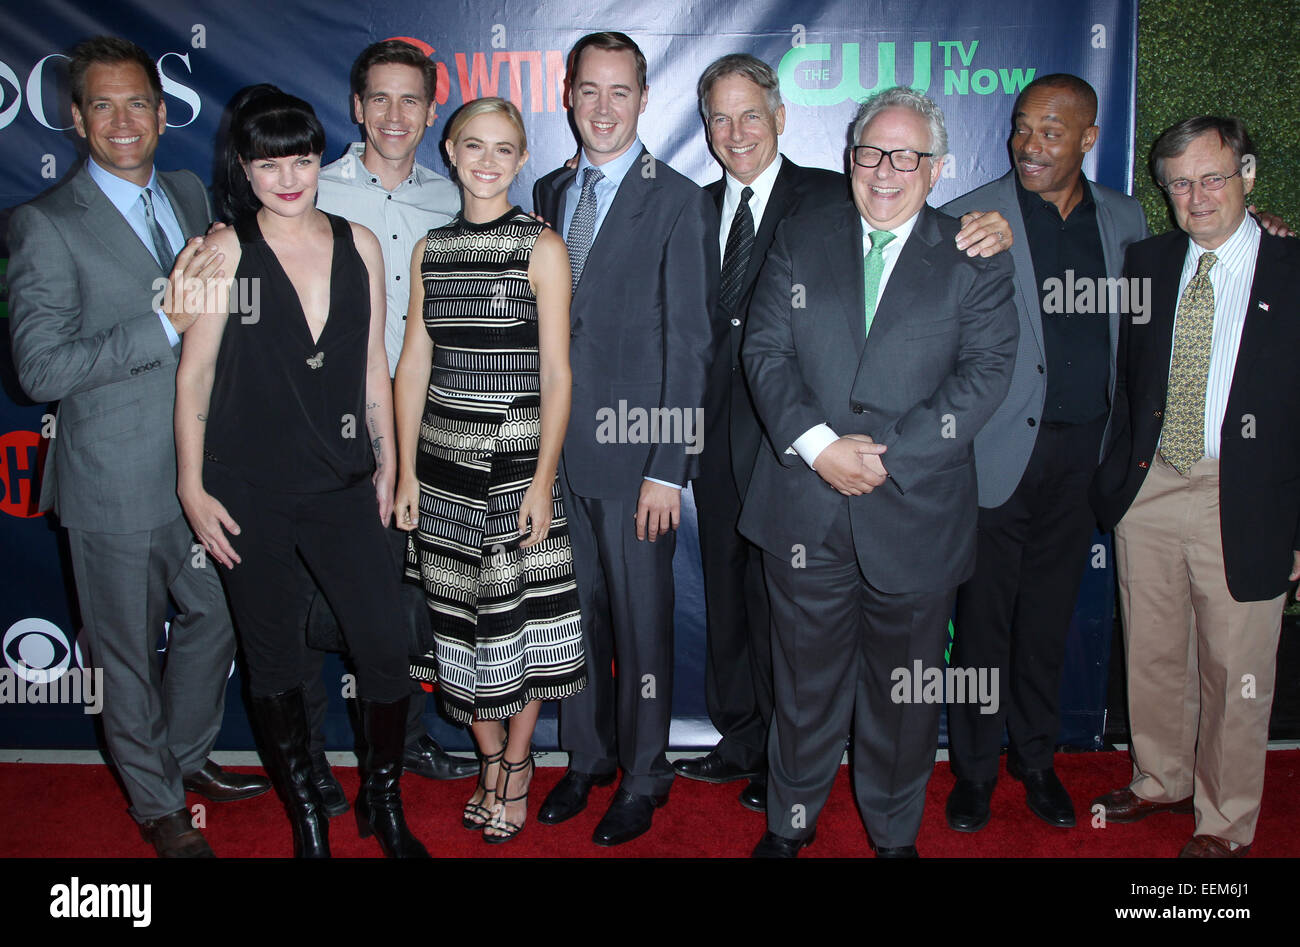 2014 Television Critics Association Summer Press Tour - CBS, CW And Showtime Party  Featuring: Michael Weatherly,Pauley Perrette,Brian Dietzen,Emily Wickersham,Sean Murray,Mark Harmon,Rocky Carroll,David McCallum Where: West Hollywood, California, United Stock Photo